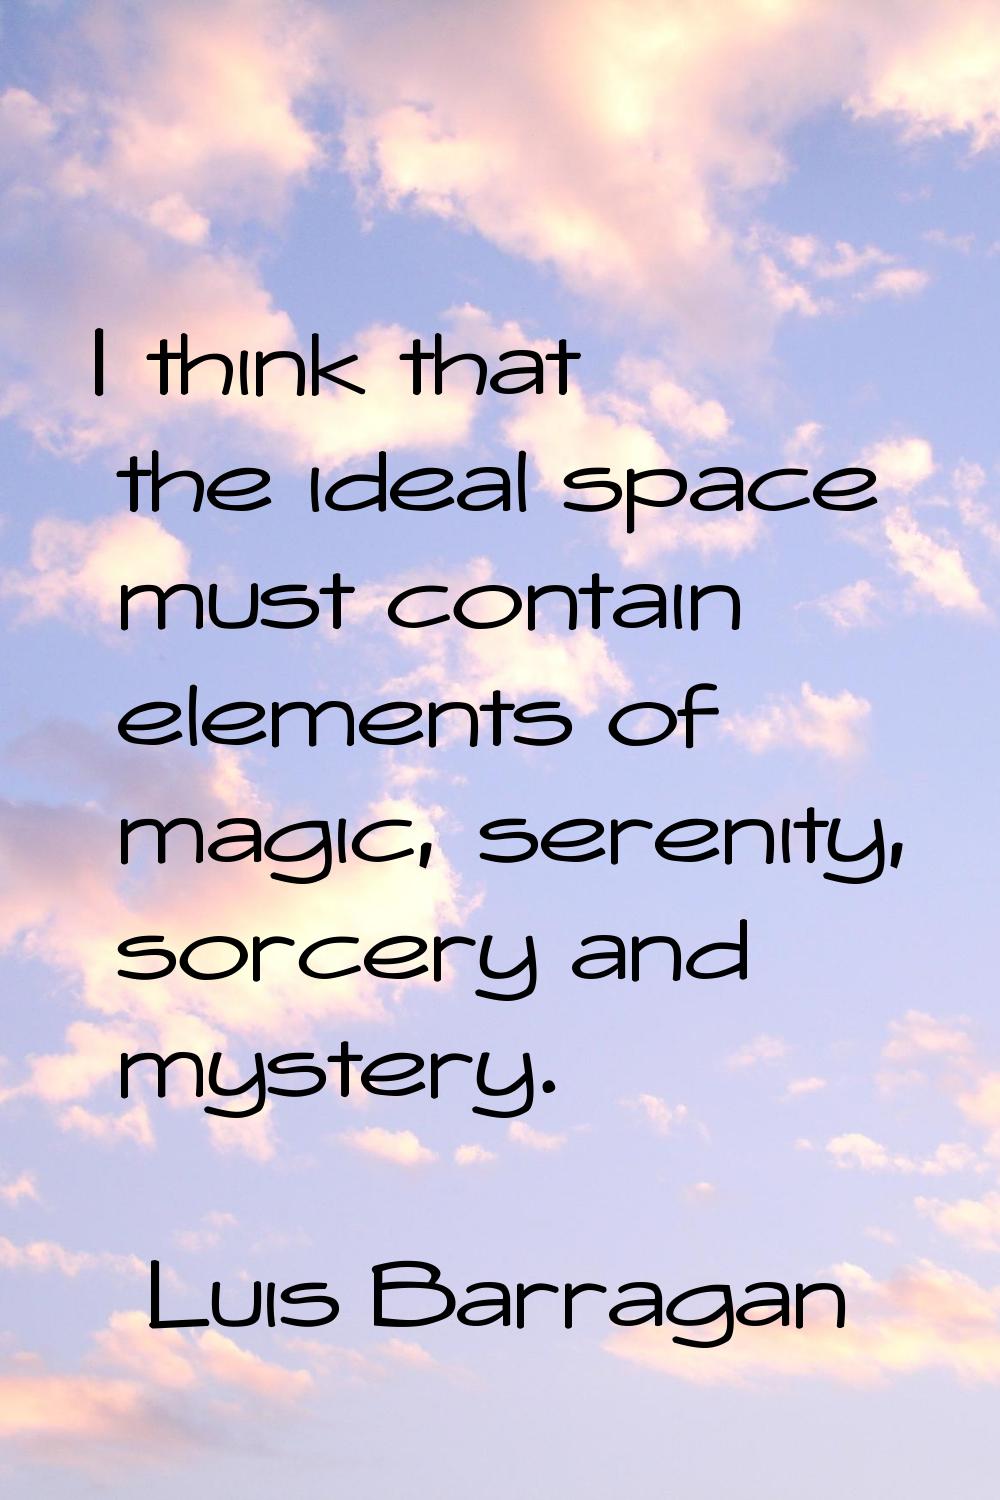 I think that the ideal space must contain elements of magic, serenity, sorcery and mystery.